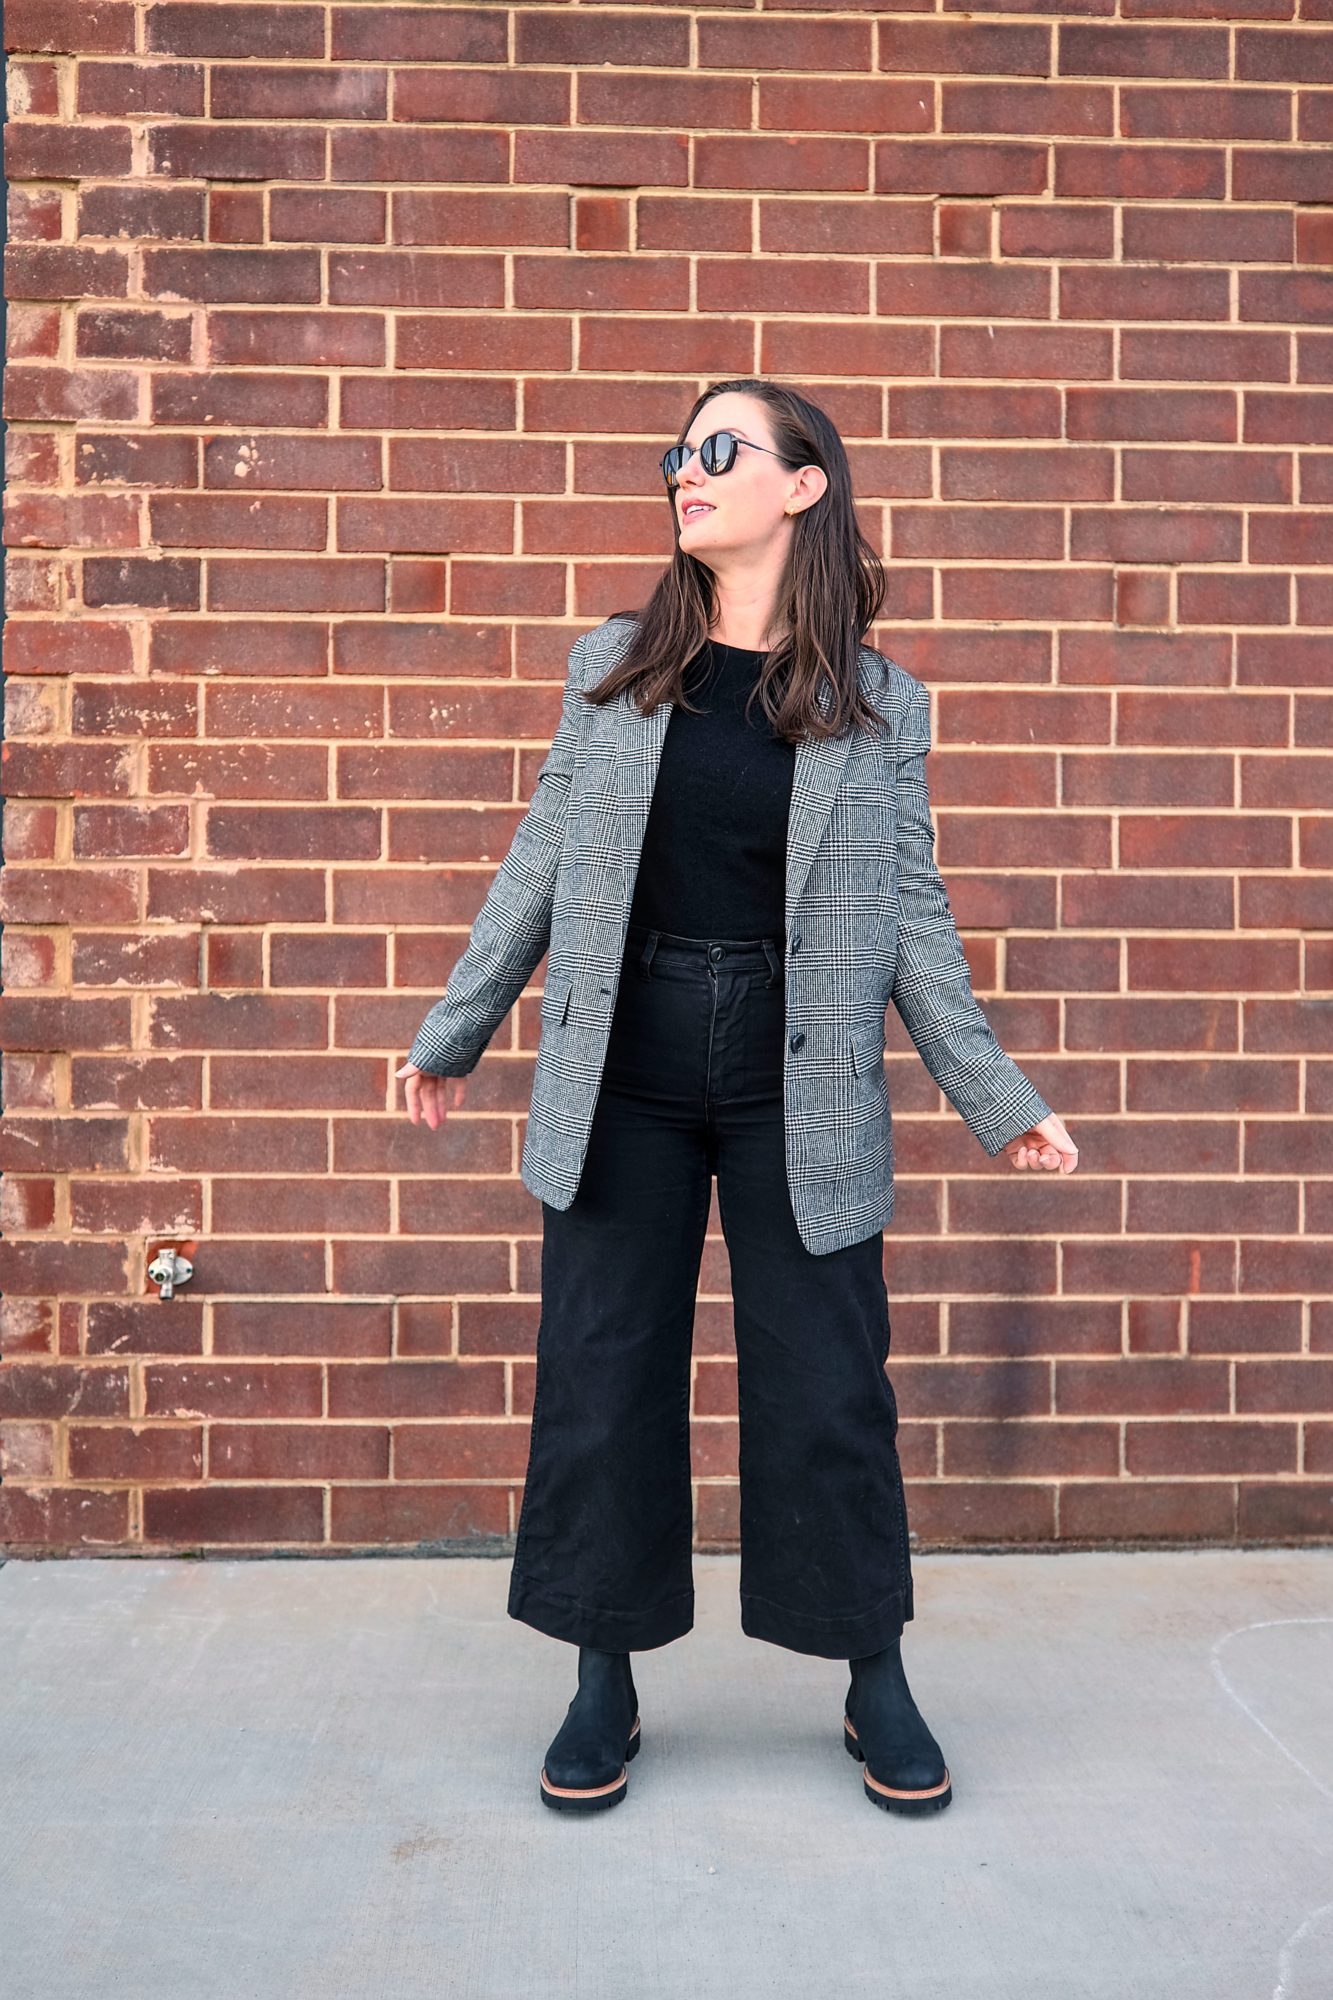 Alyssa wears the Go-To Lug Chelsea Boot with a plaid blazer and black pants in front of a brick wall